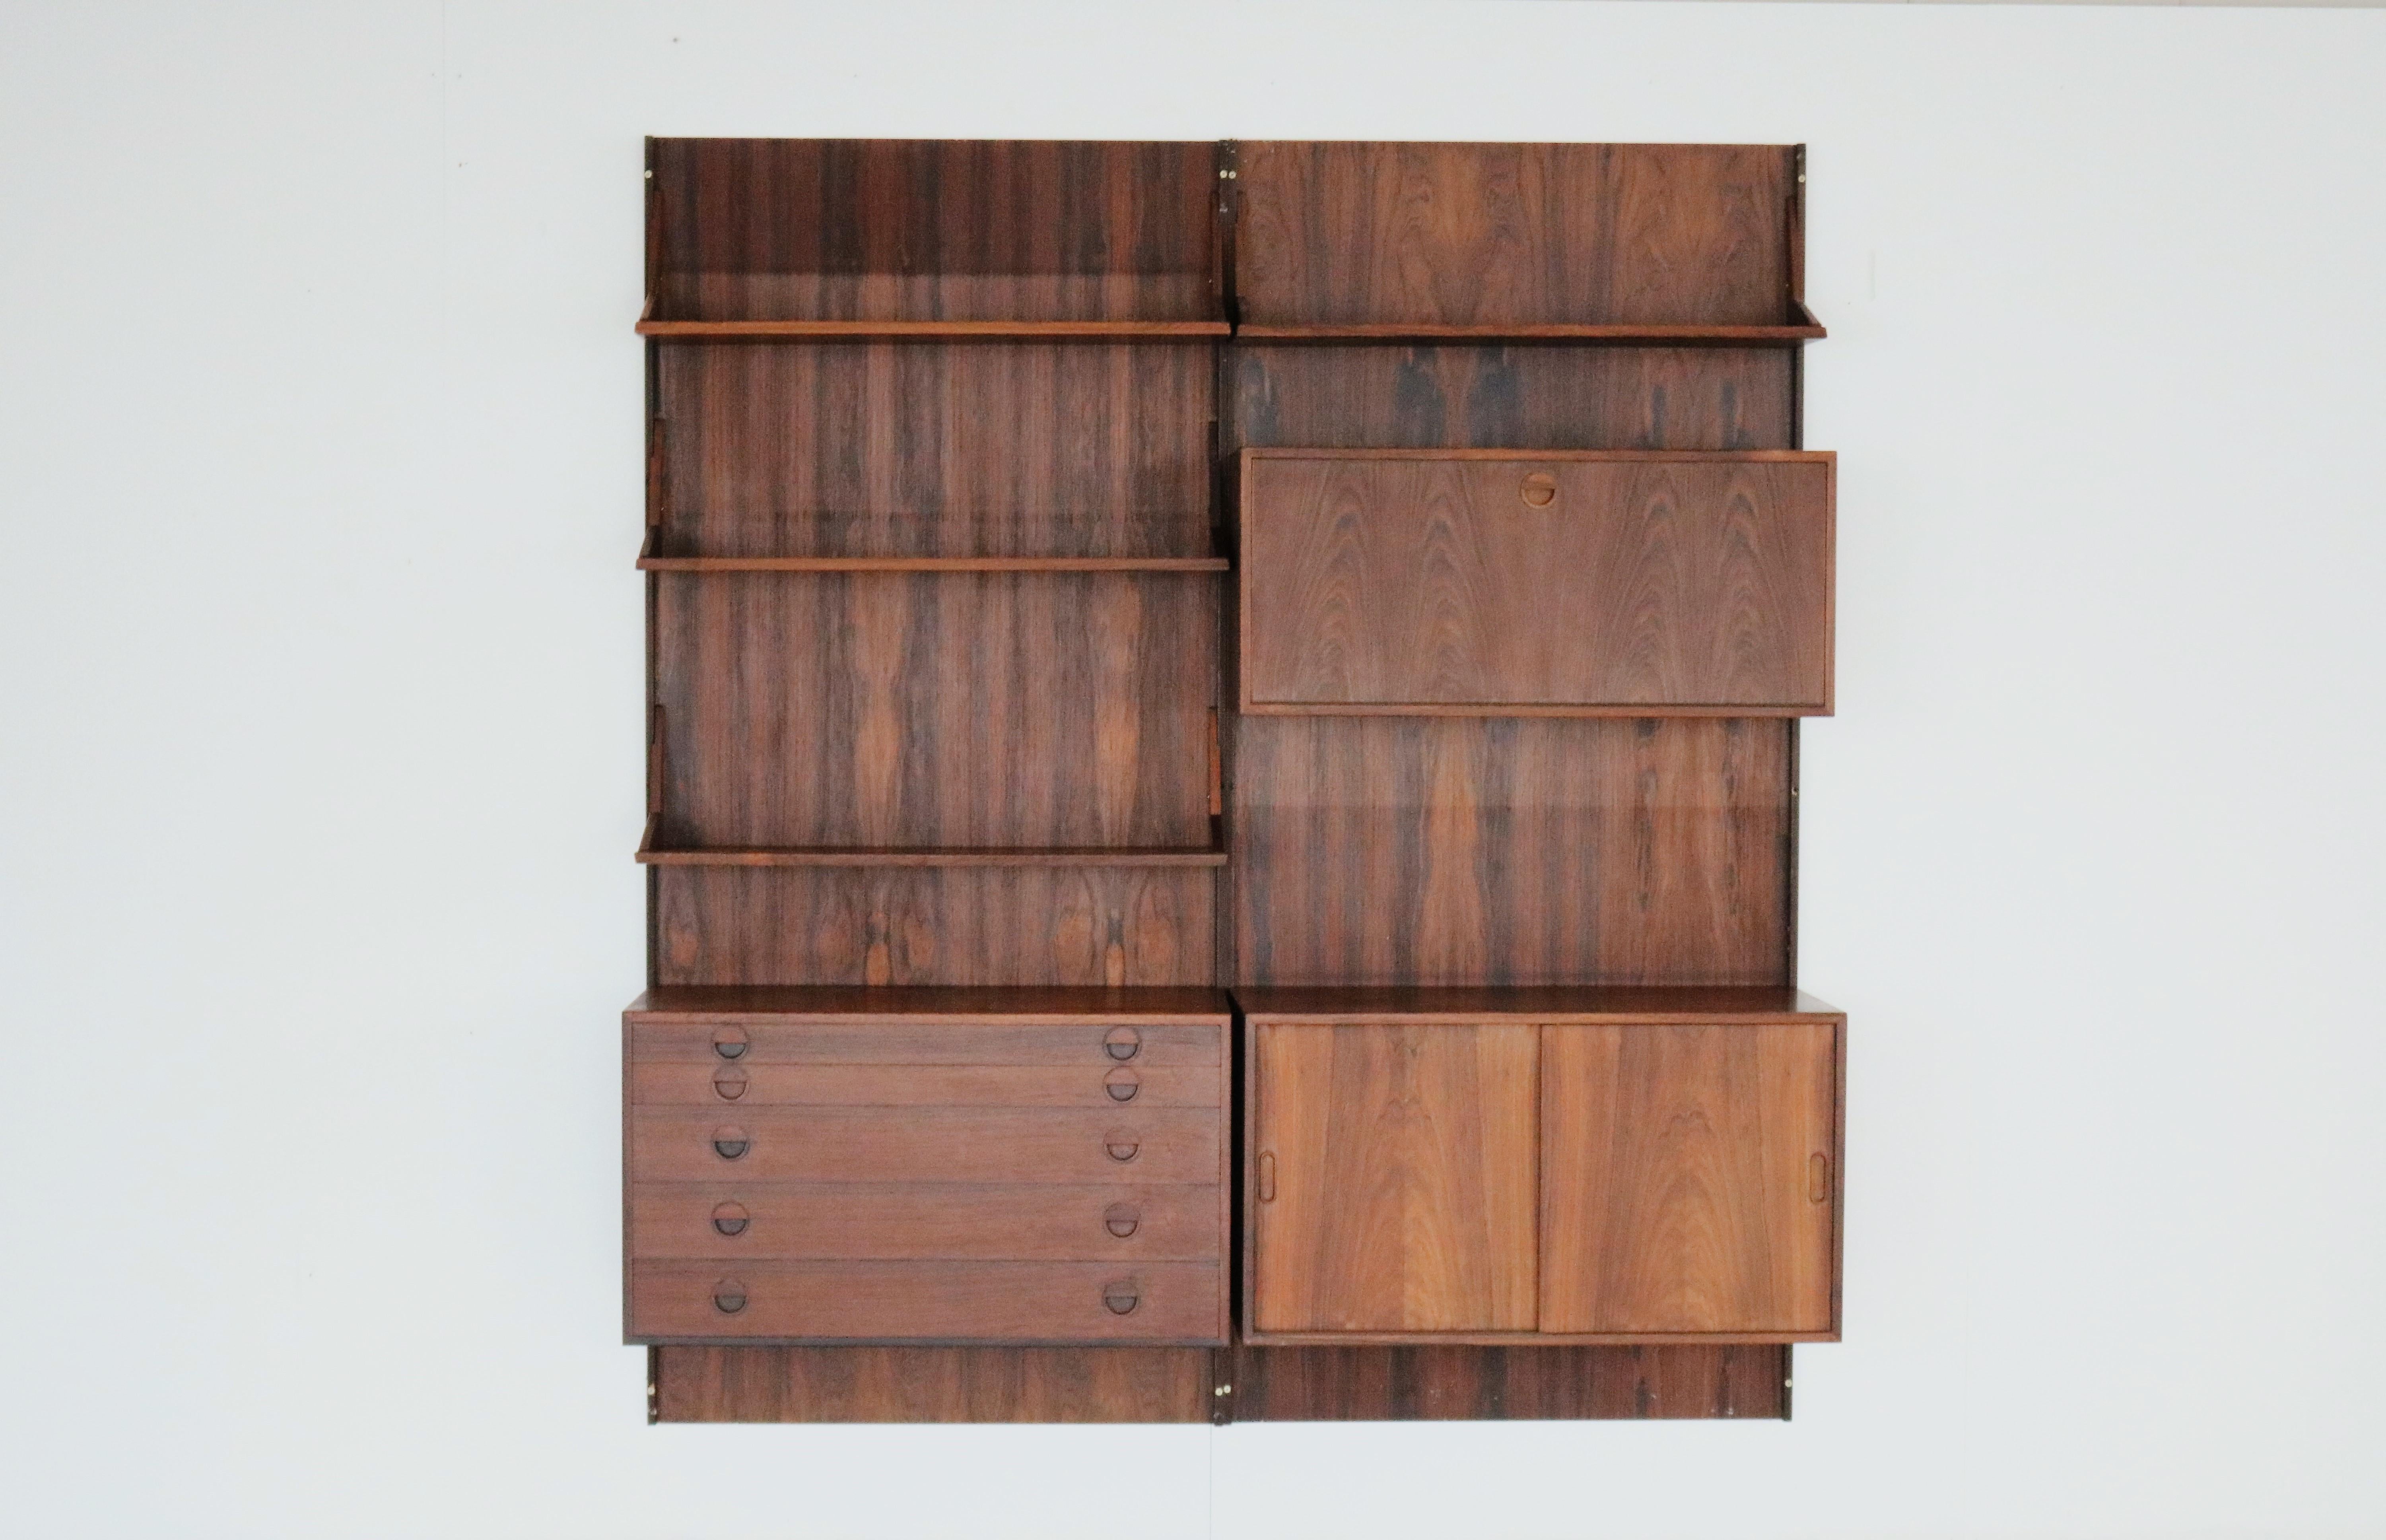 Vintage wall system rosewood HG Furniture Danish.

Rosewood wall system designed by Rud Thygesen & Johnny Sorensen for HG Furniture. The system is of high quality and can be arranged according to your own wishes.

Period 1960s
Designs Rud